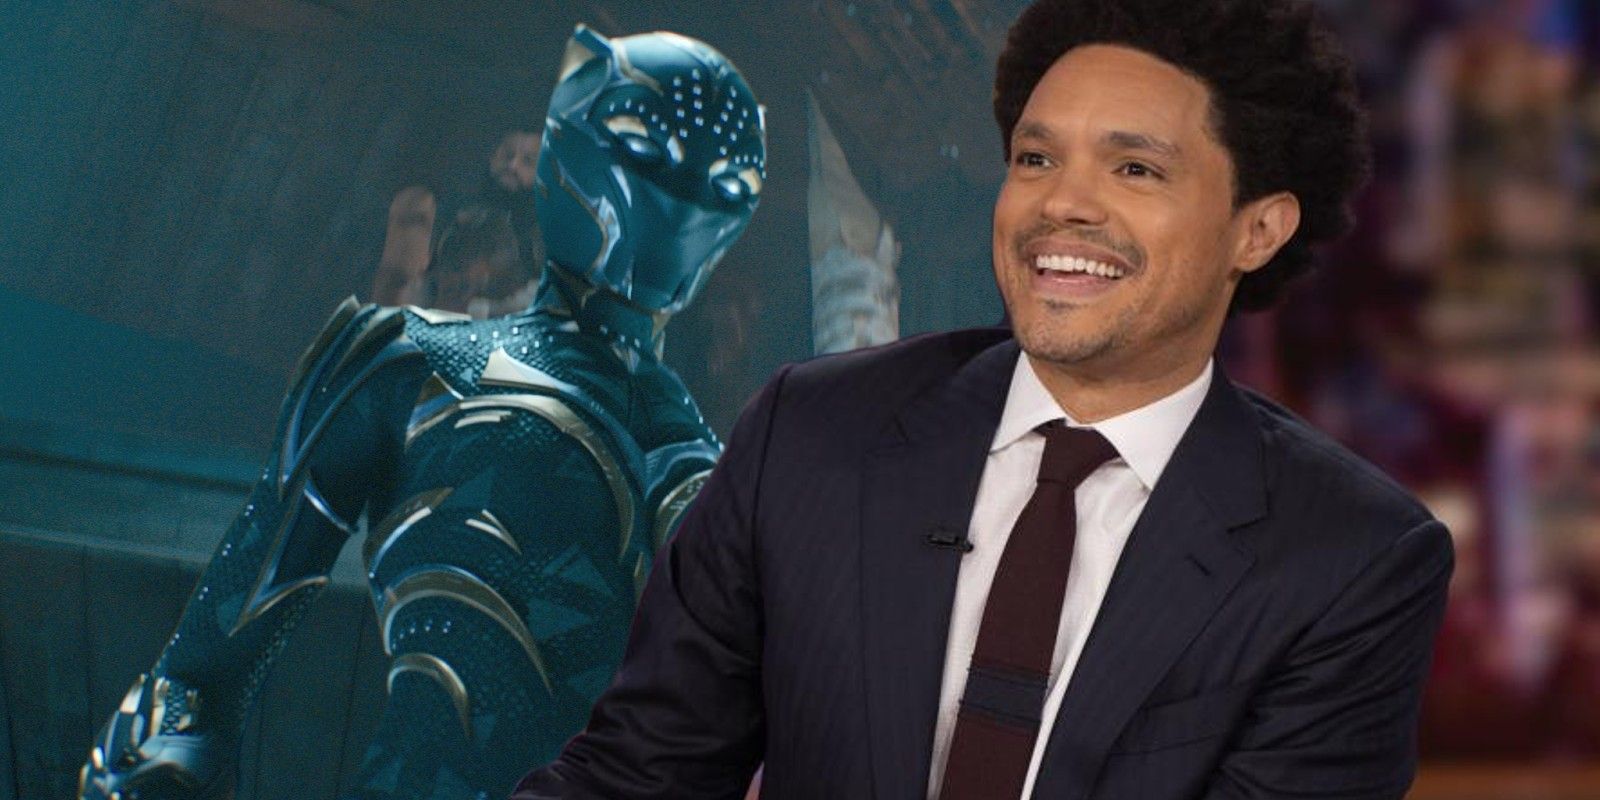 An image of the Black Panther in Black Panther: Wakanda Forever and Trevor Noah smiling